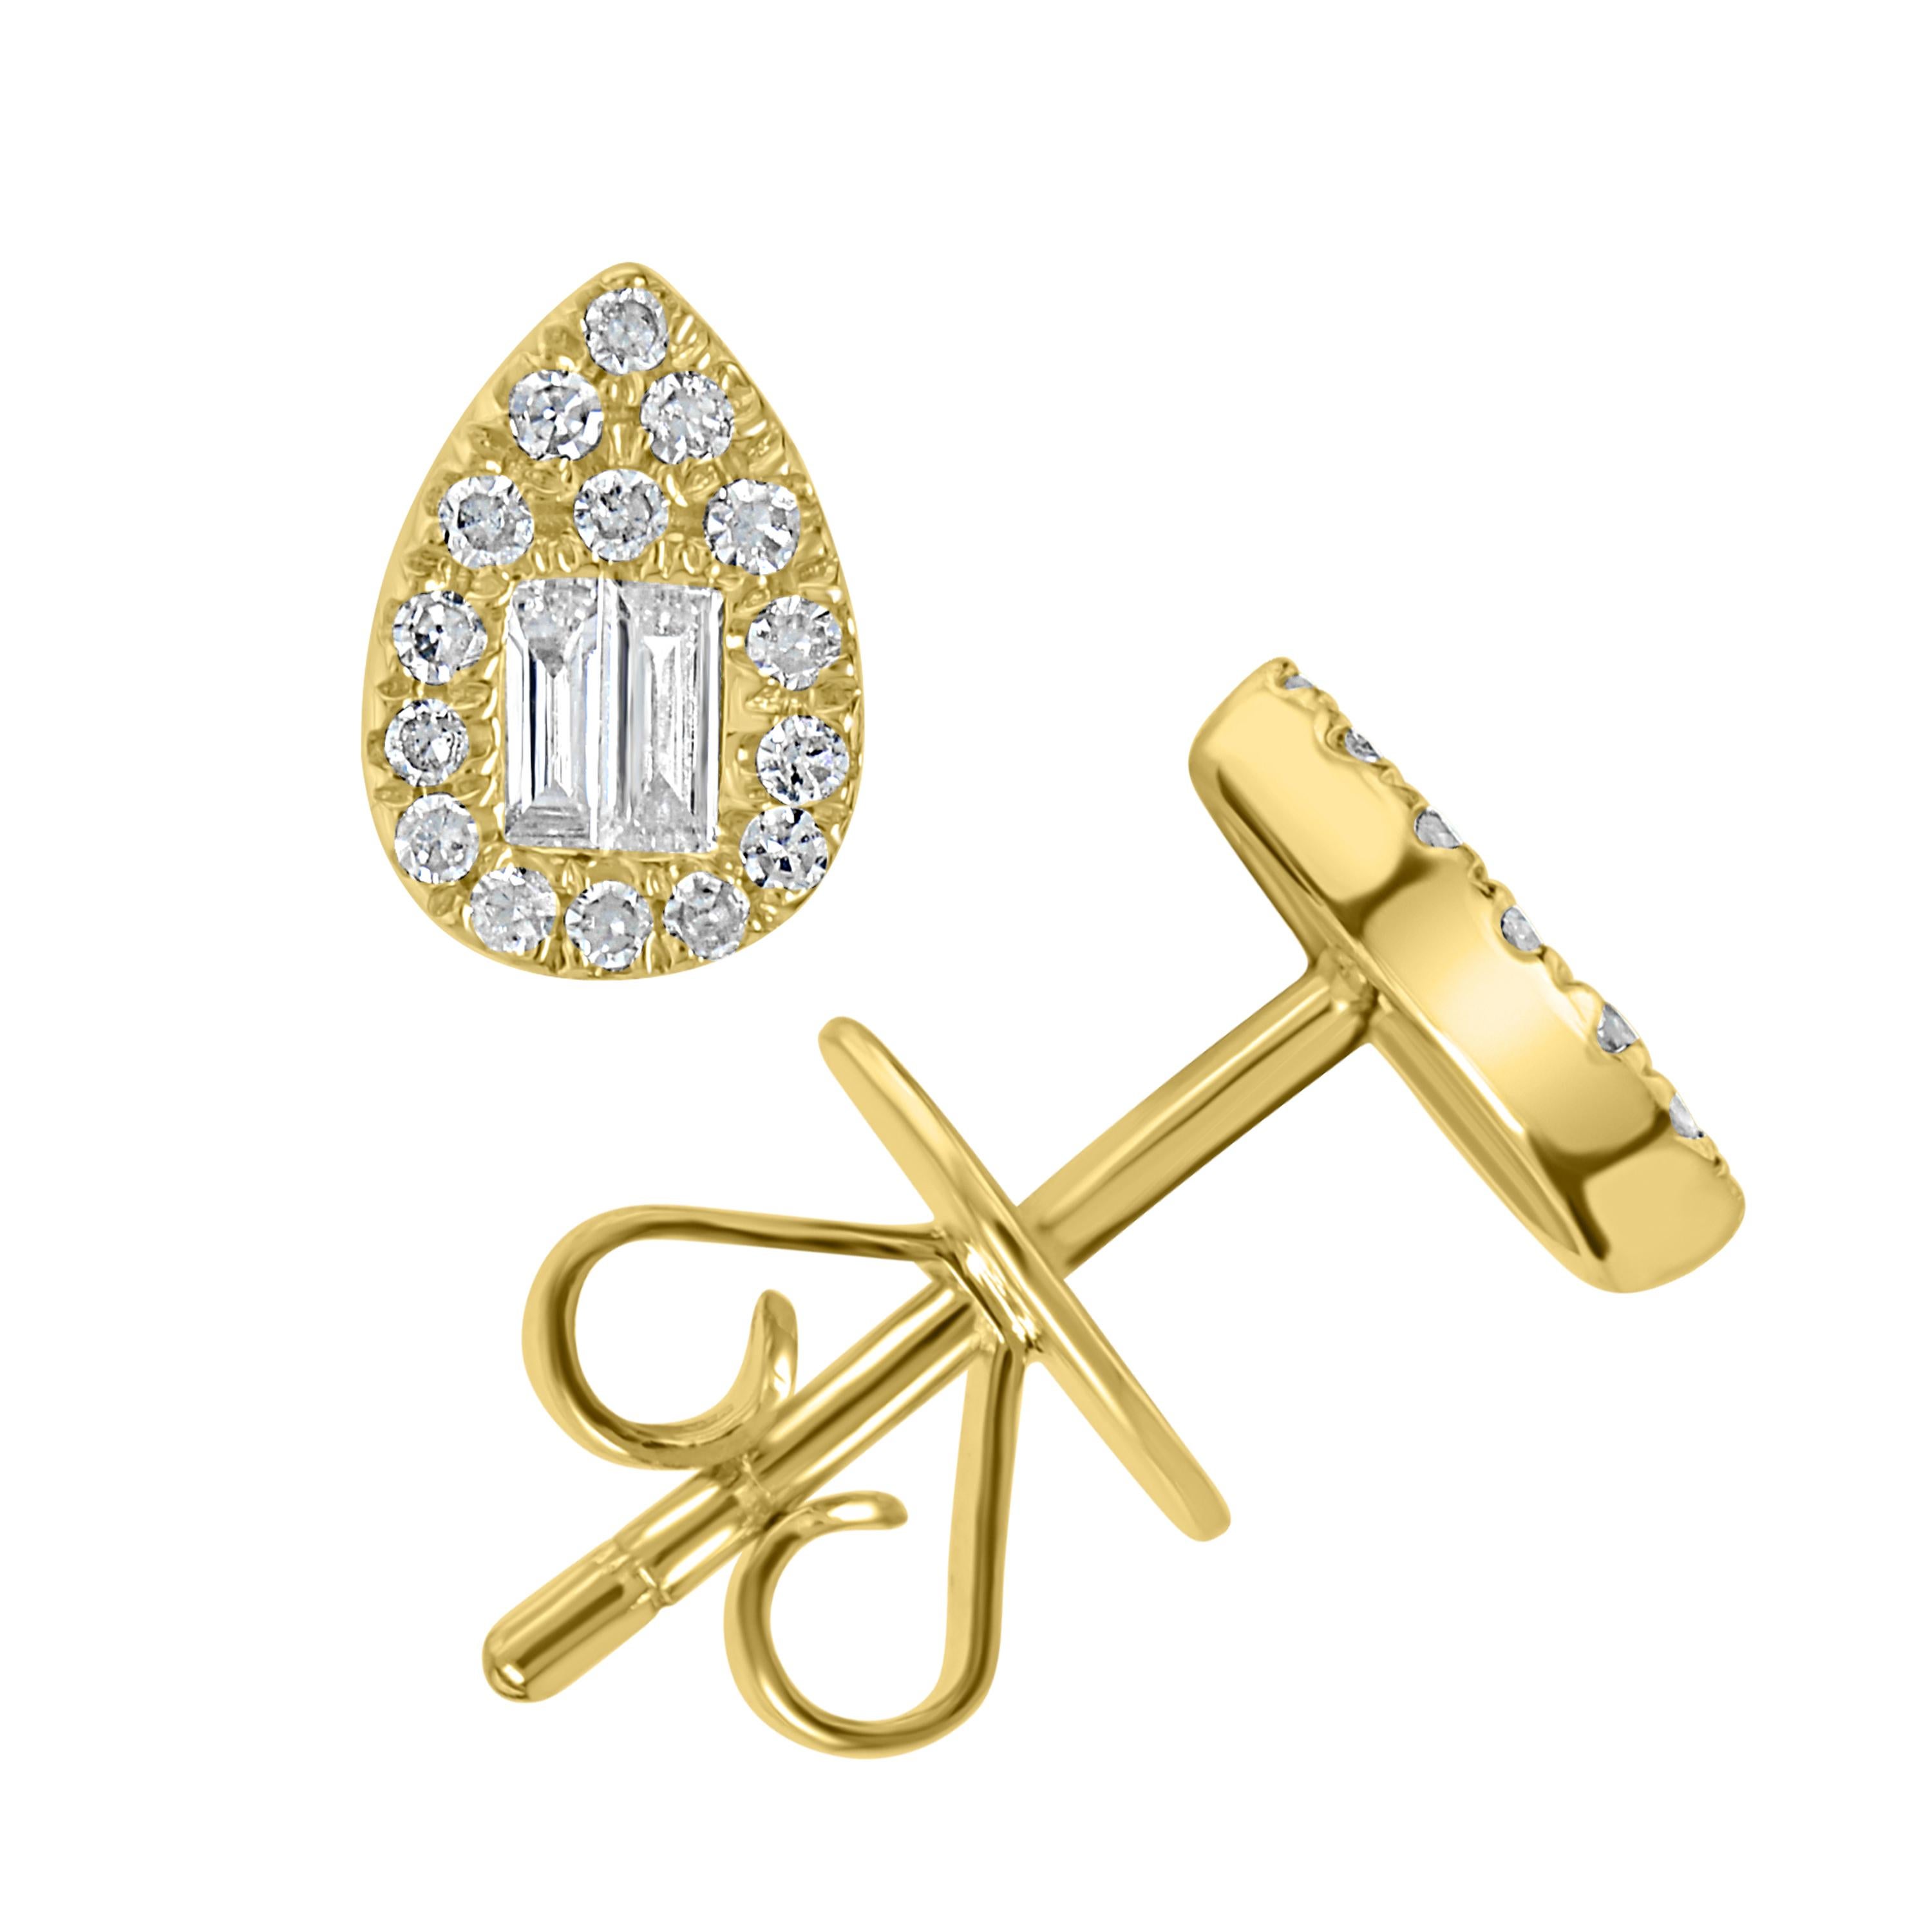 Style your everyday looks with the right amount of sparkle in these Luxle charming studs featured with baguette and pave round cut diamonds set in a teardrop shape of 18K yellow gold.

Please follow the Luxury Jewels storefront to view the latest